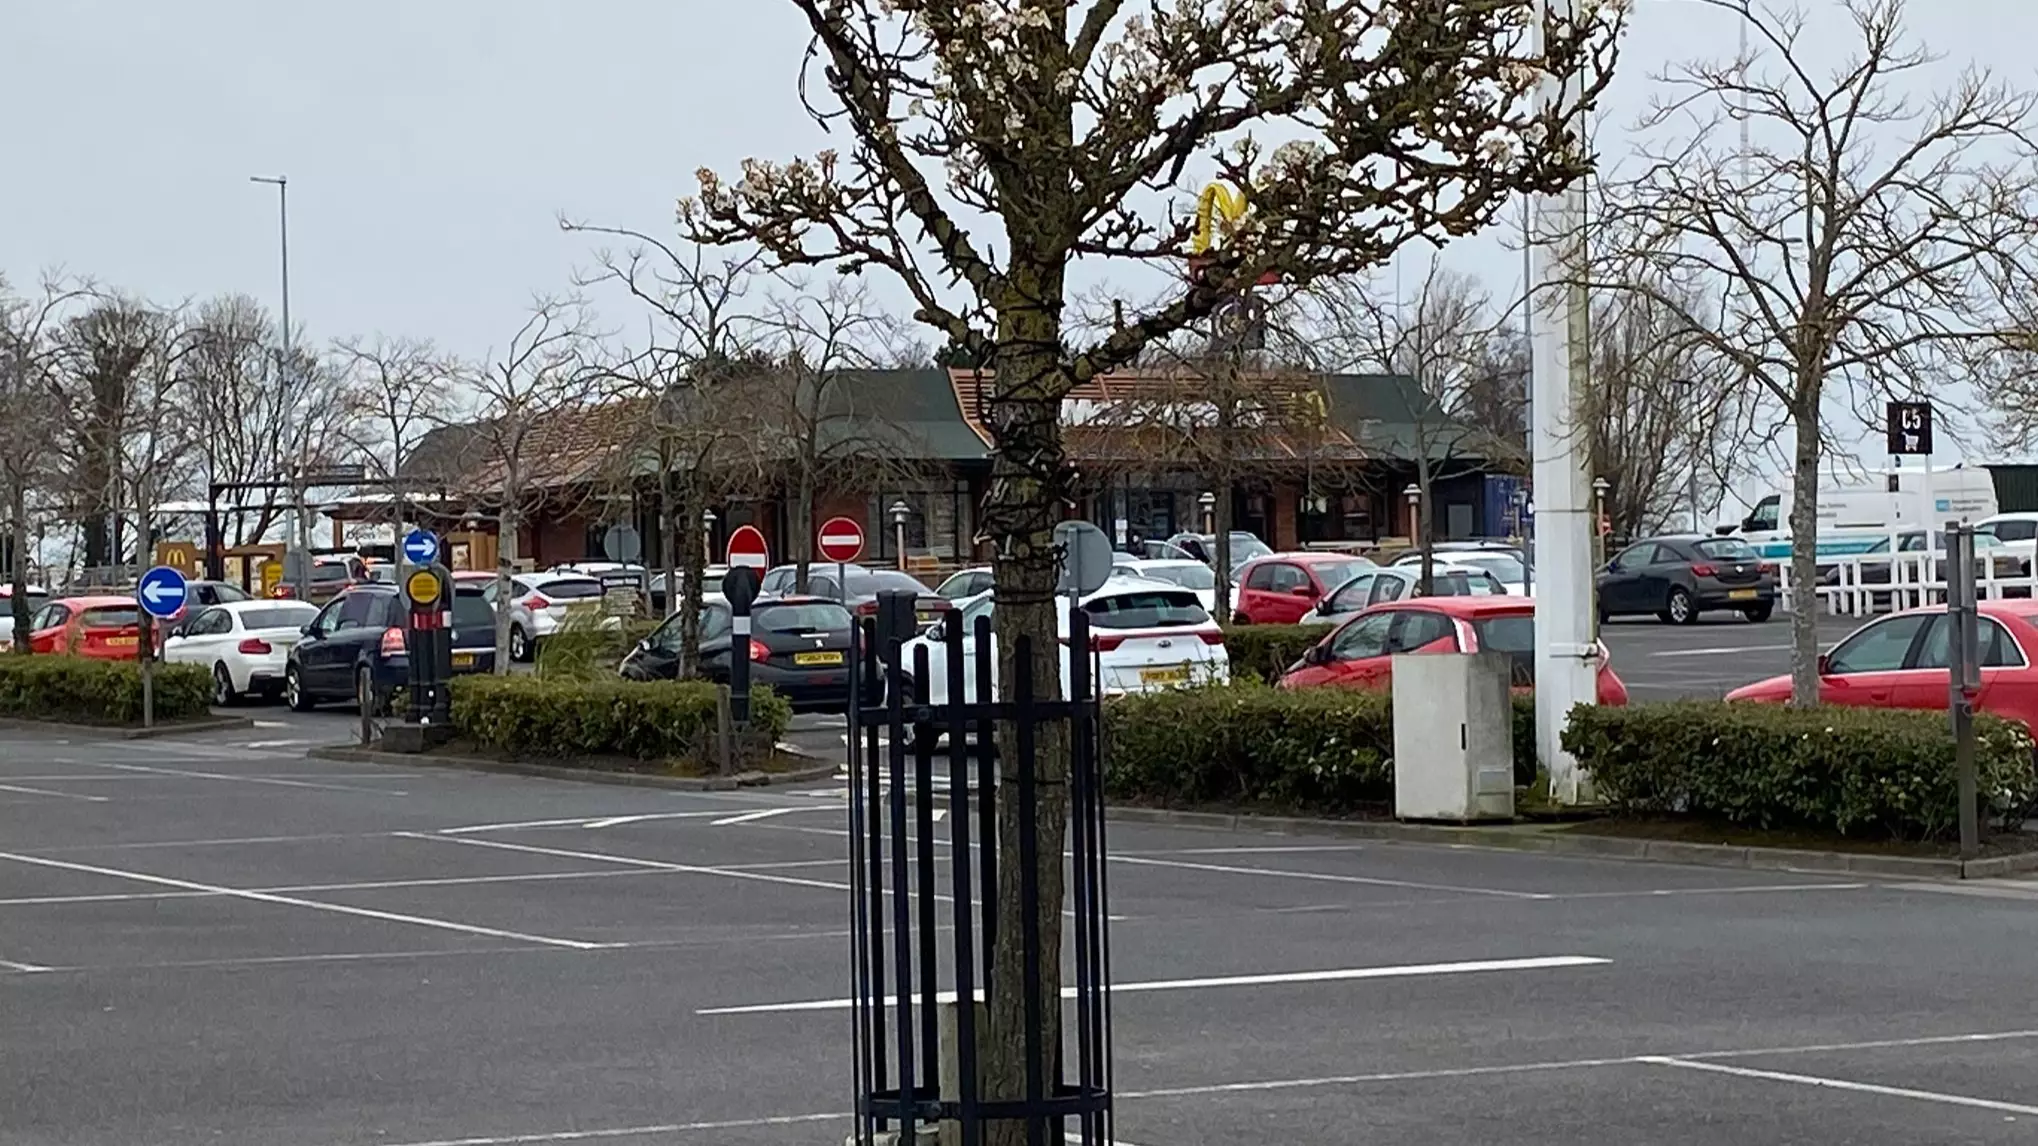 People Are Joining Huge Queues To Get A McDonald's Before They Close